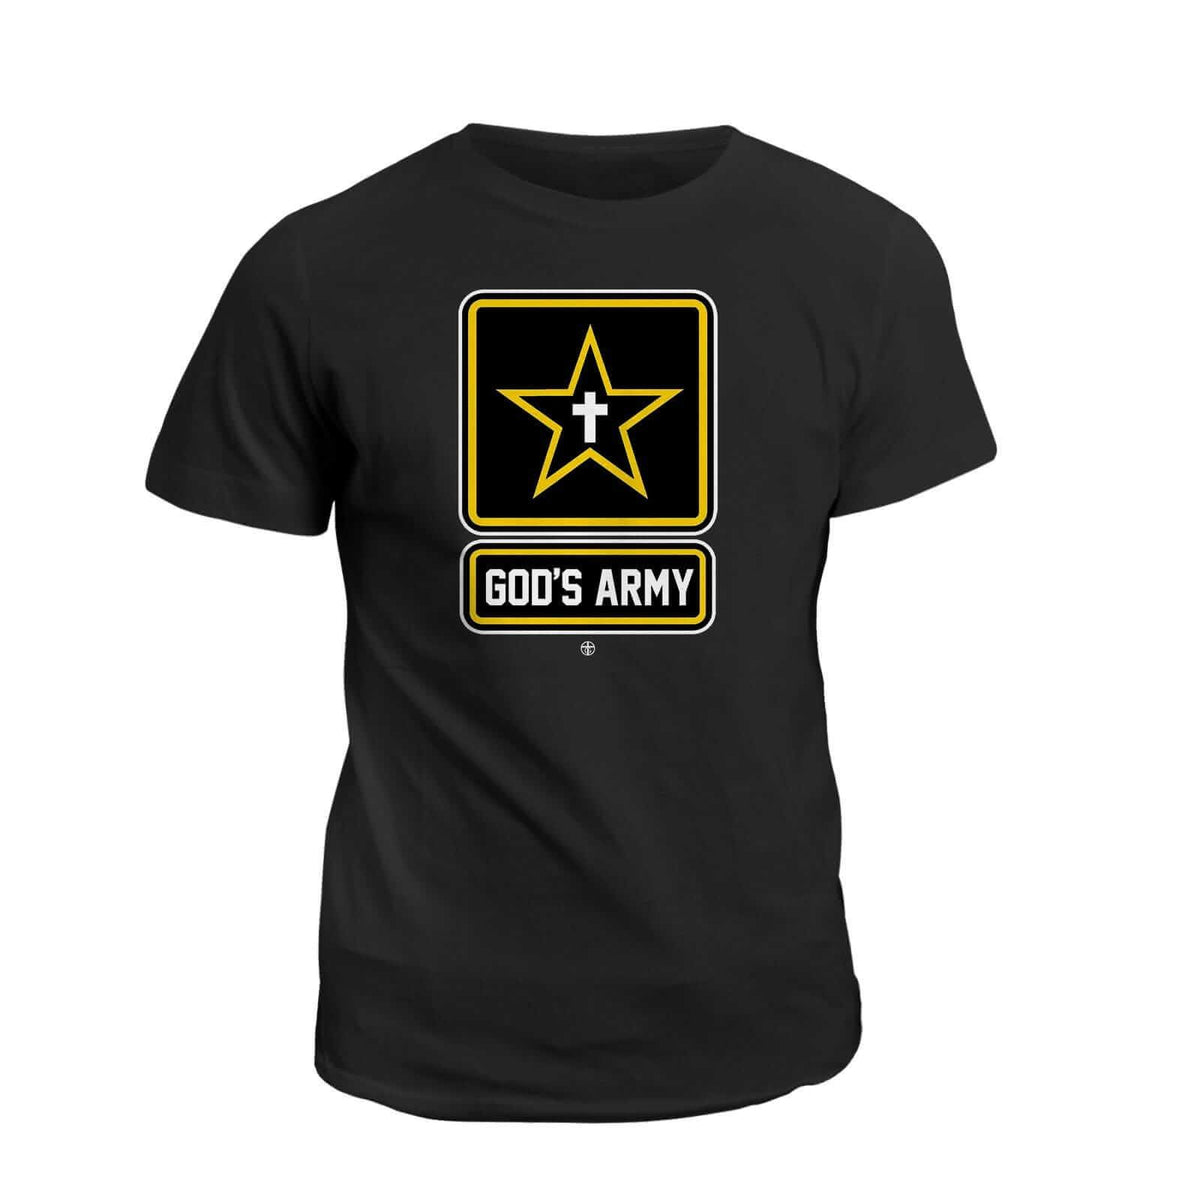 God's Army - Our True God